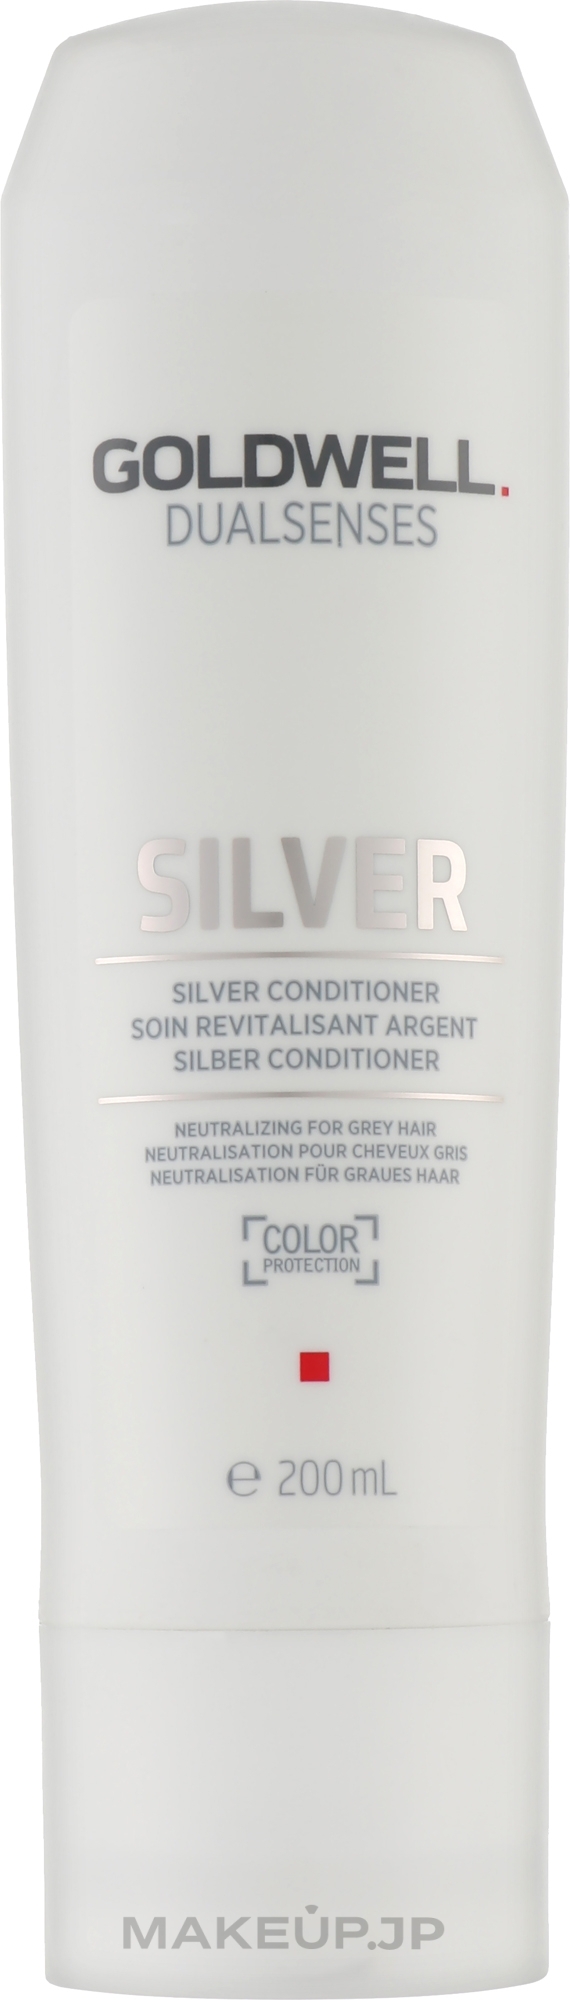 Blonde & Grey Hair Conditioner - Goldwell Dualsenses Silver Conditioner — photo 200 ml